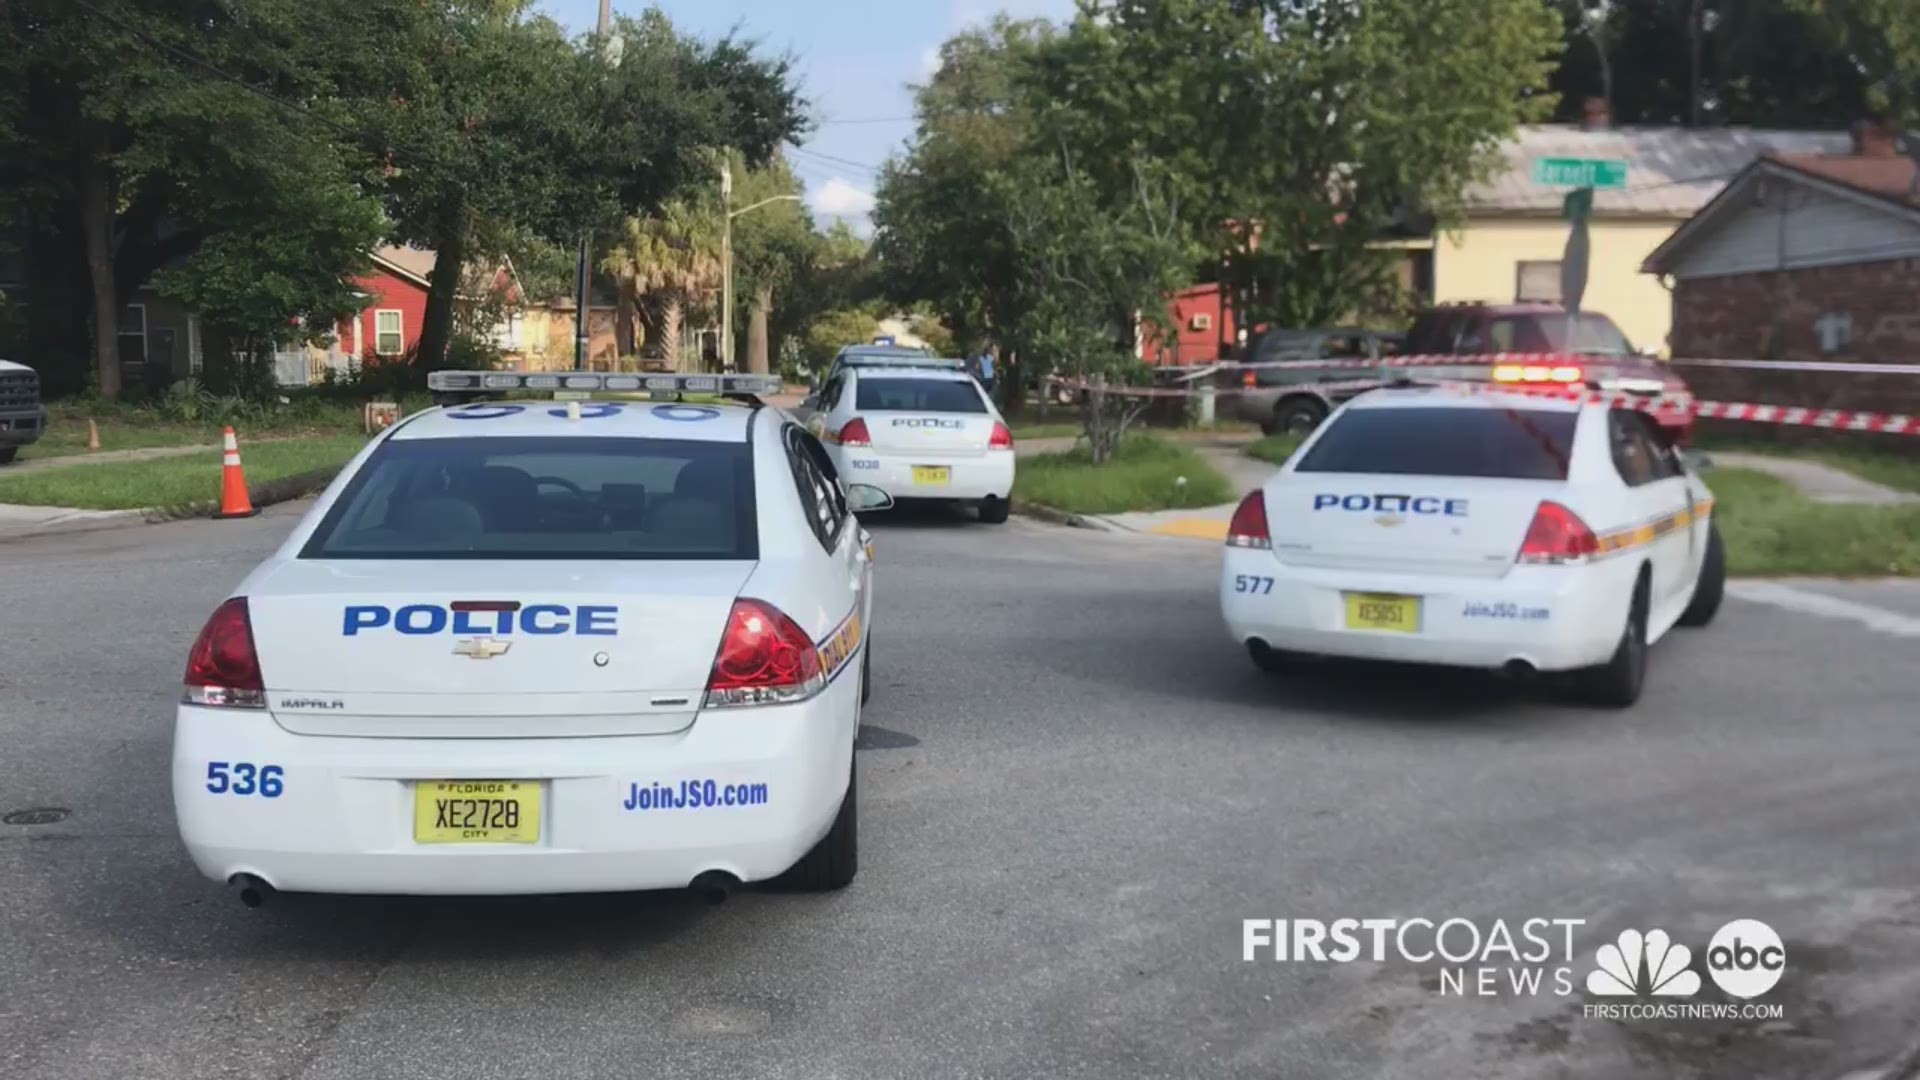 JSO said police officers are responding to reports of gunfire. At this time, no shooting victims have been located.